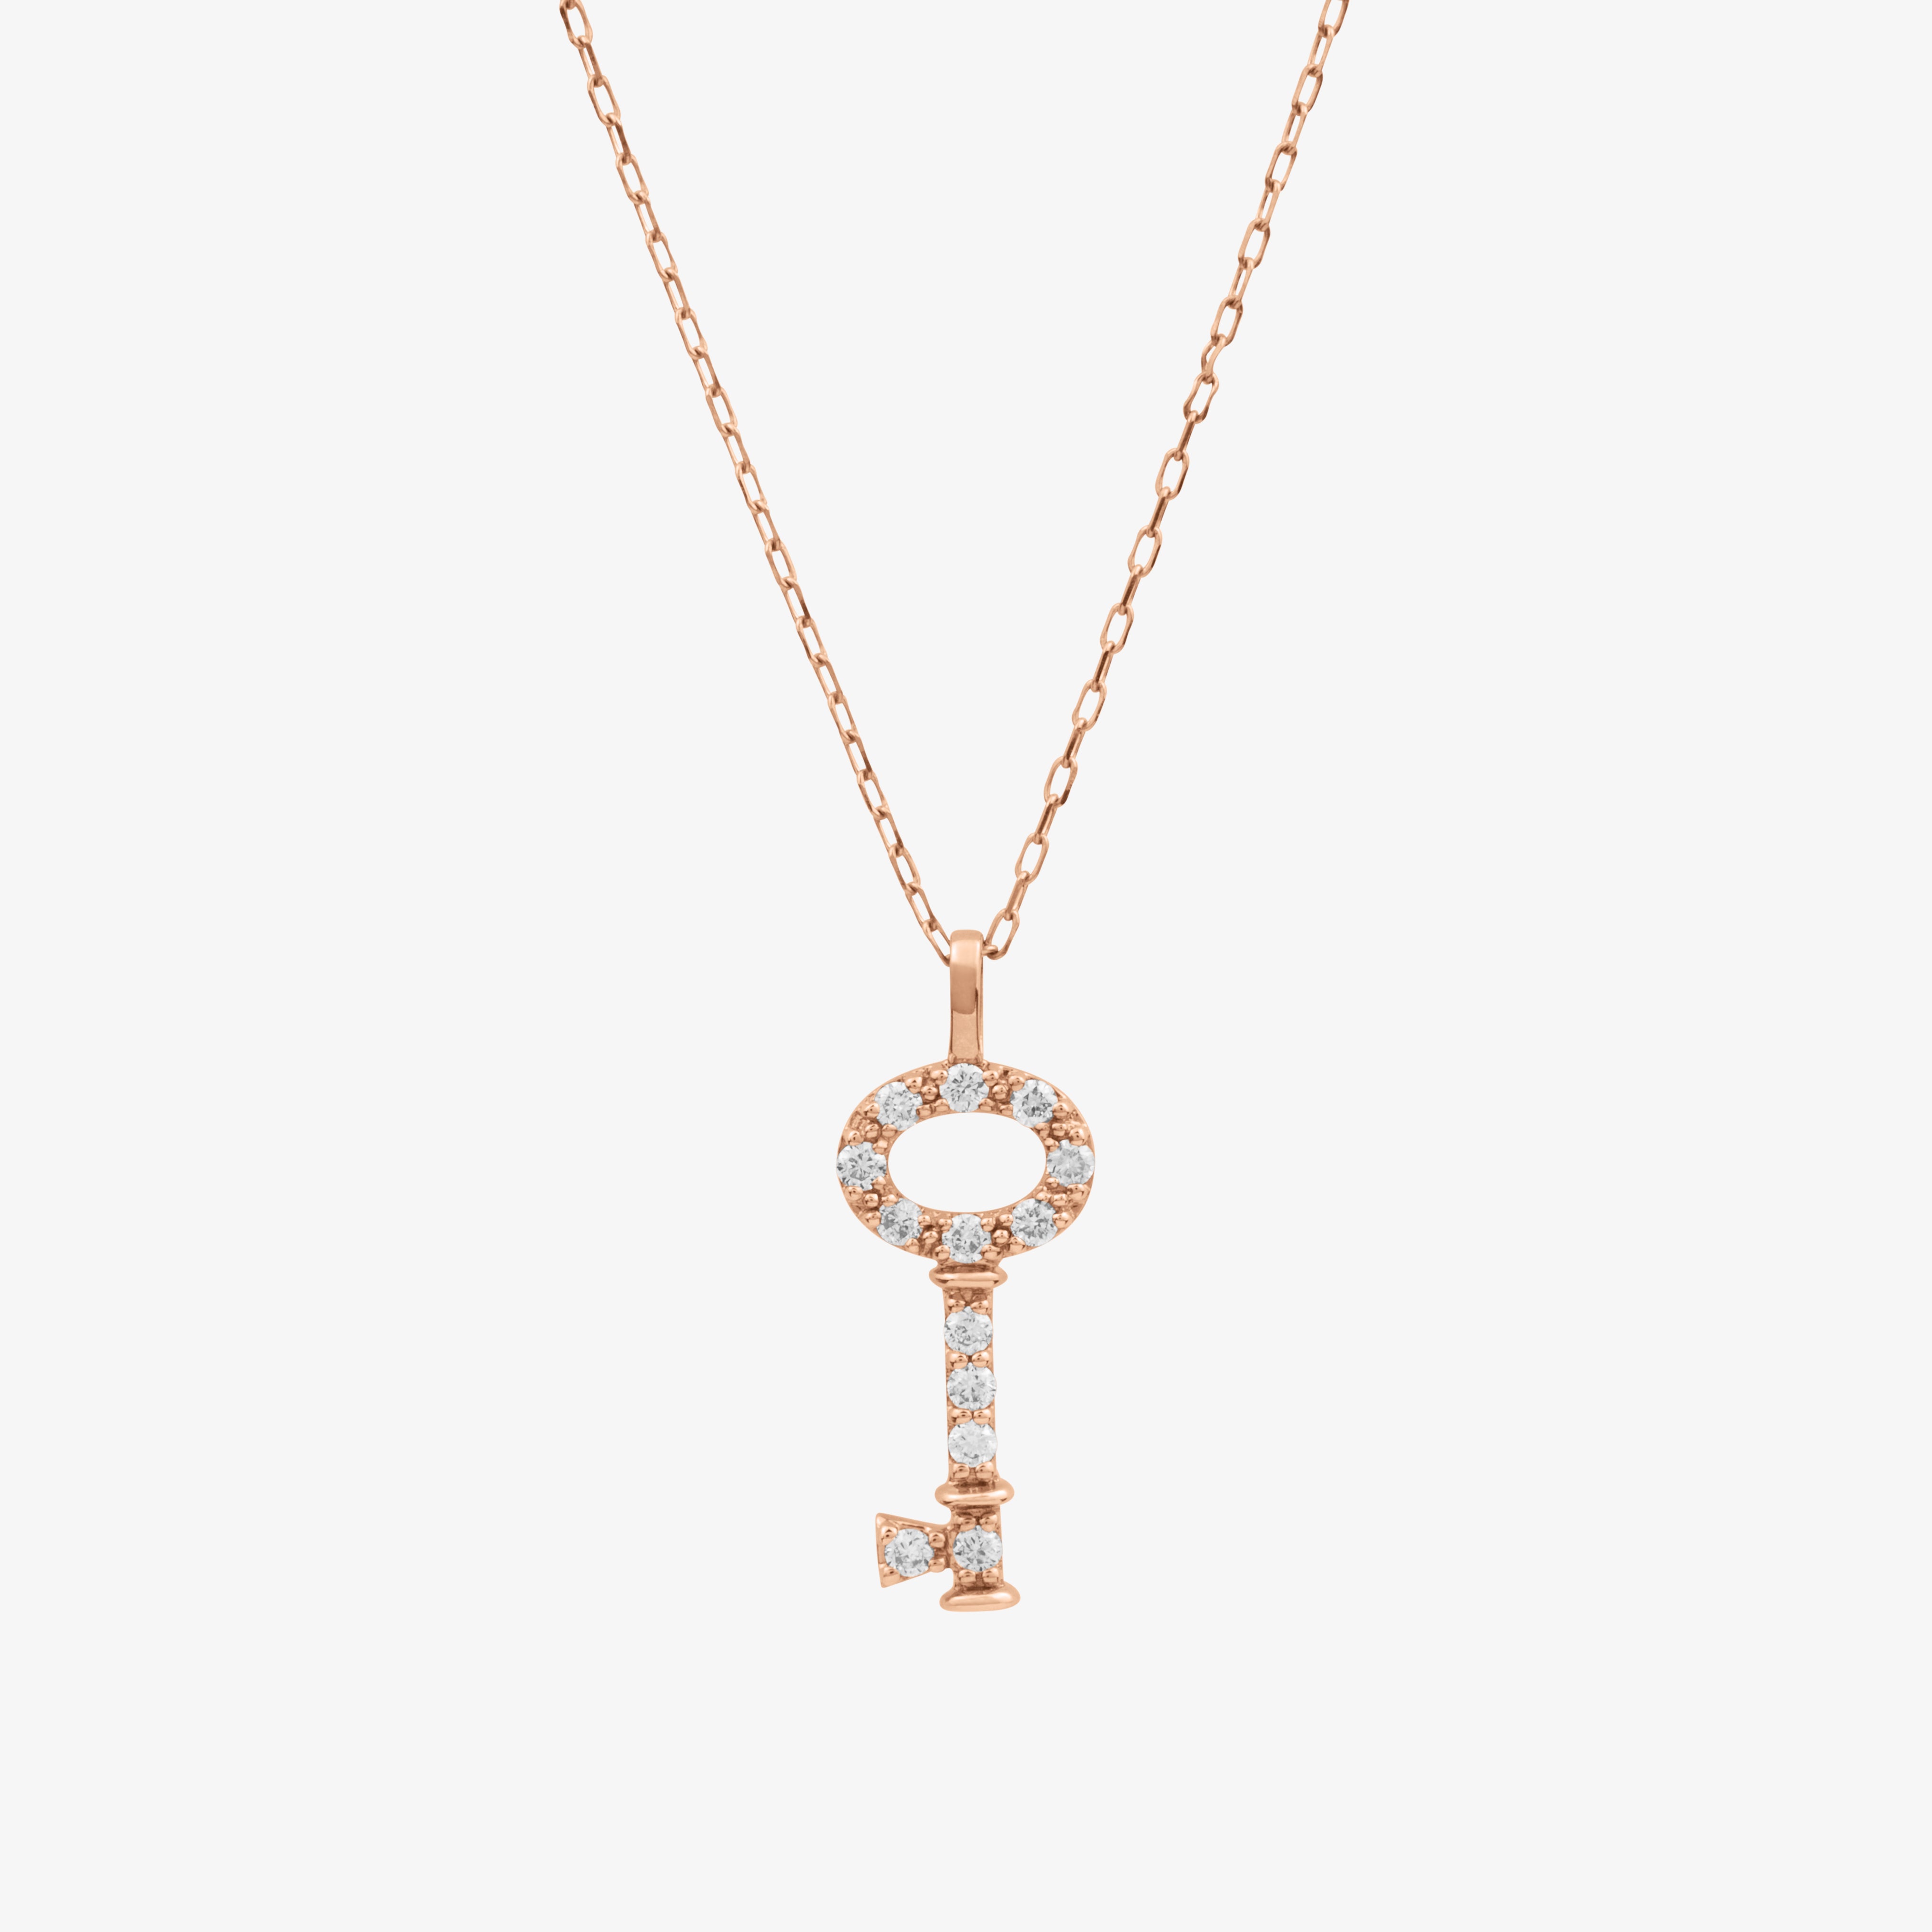 Key Necklace In 18K Solid Rose Gold With Diamonds